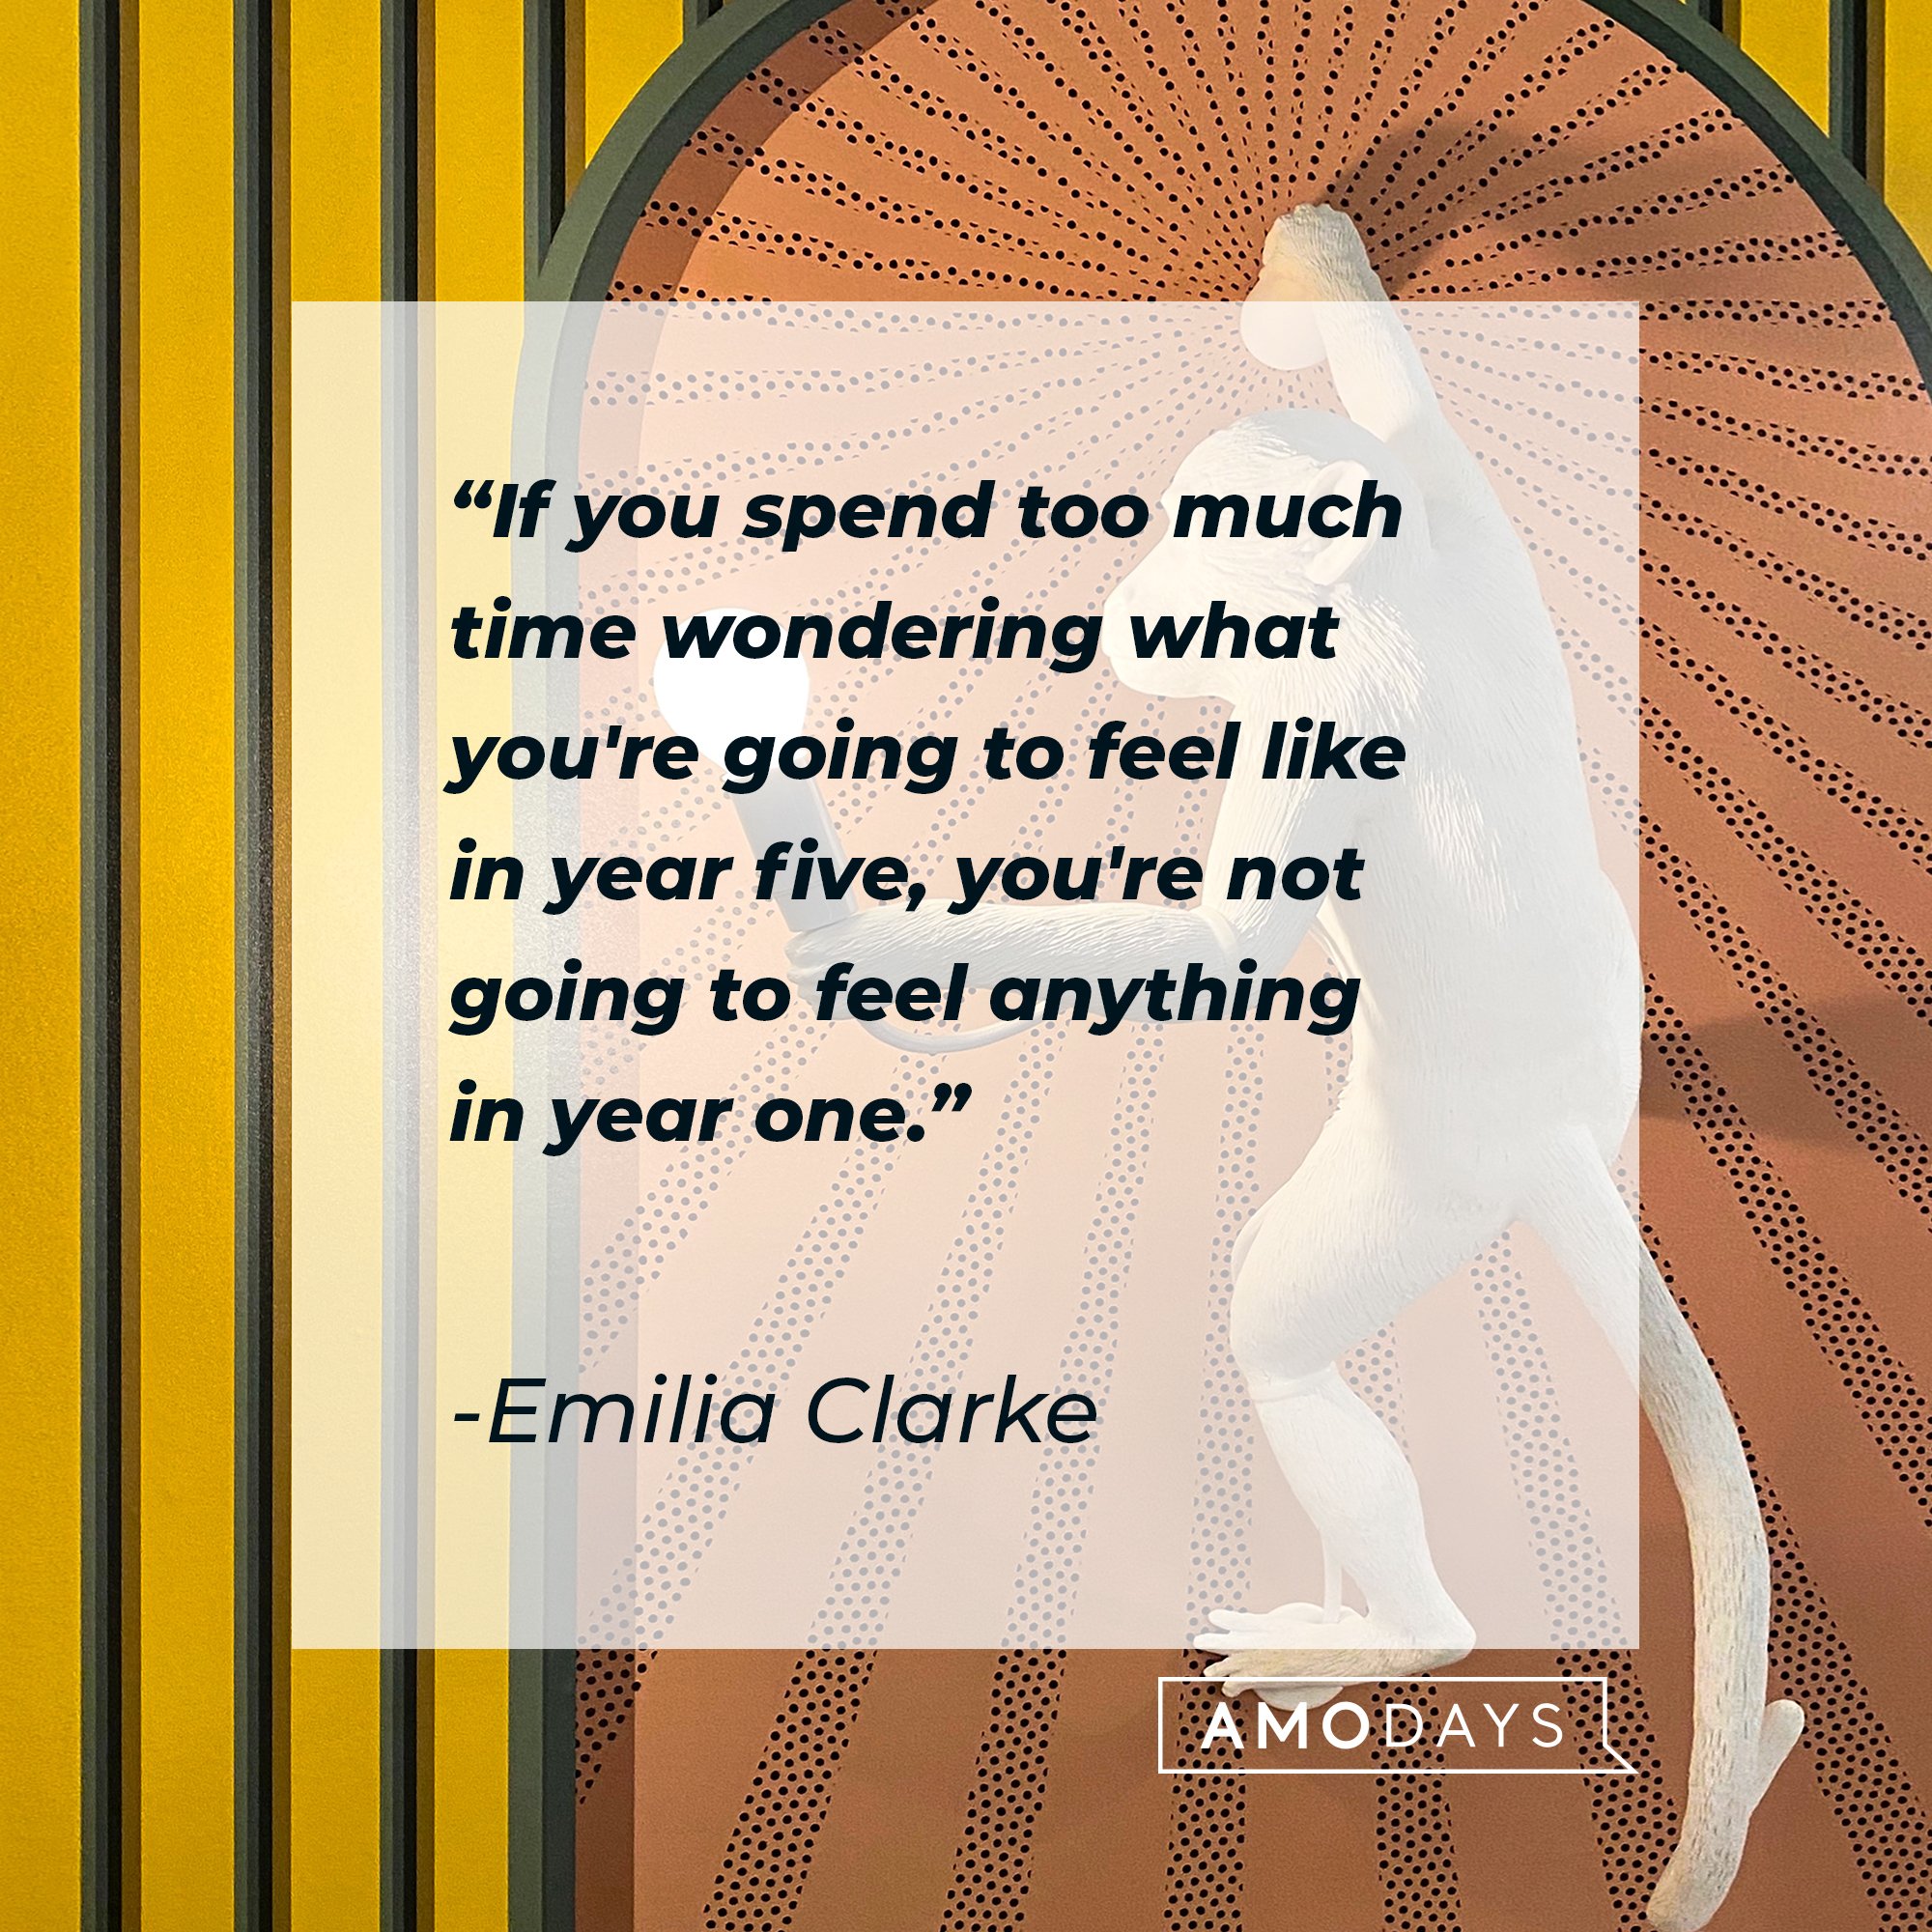 Emilia Clarke’s quote: "If you spend too much time wondering what you're going to feel like in year five, you're not going to feel anything in year one." | Image: AmoDays